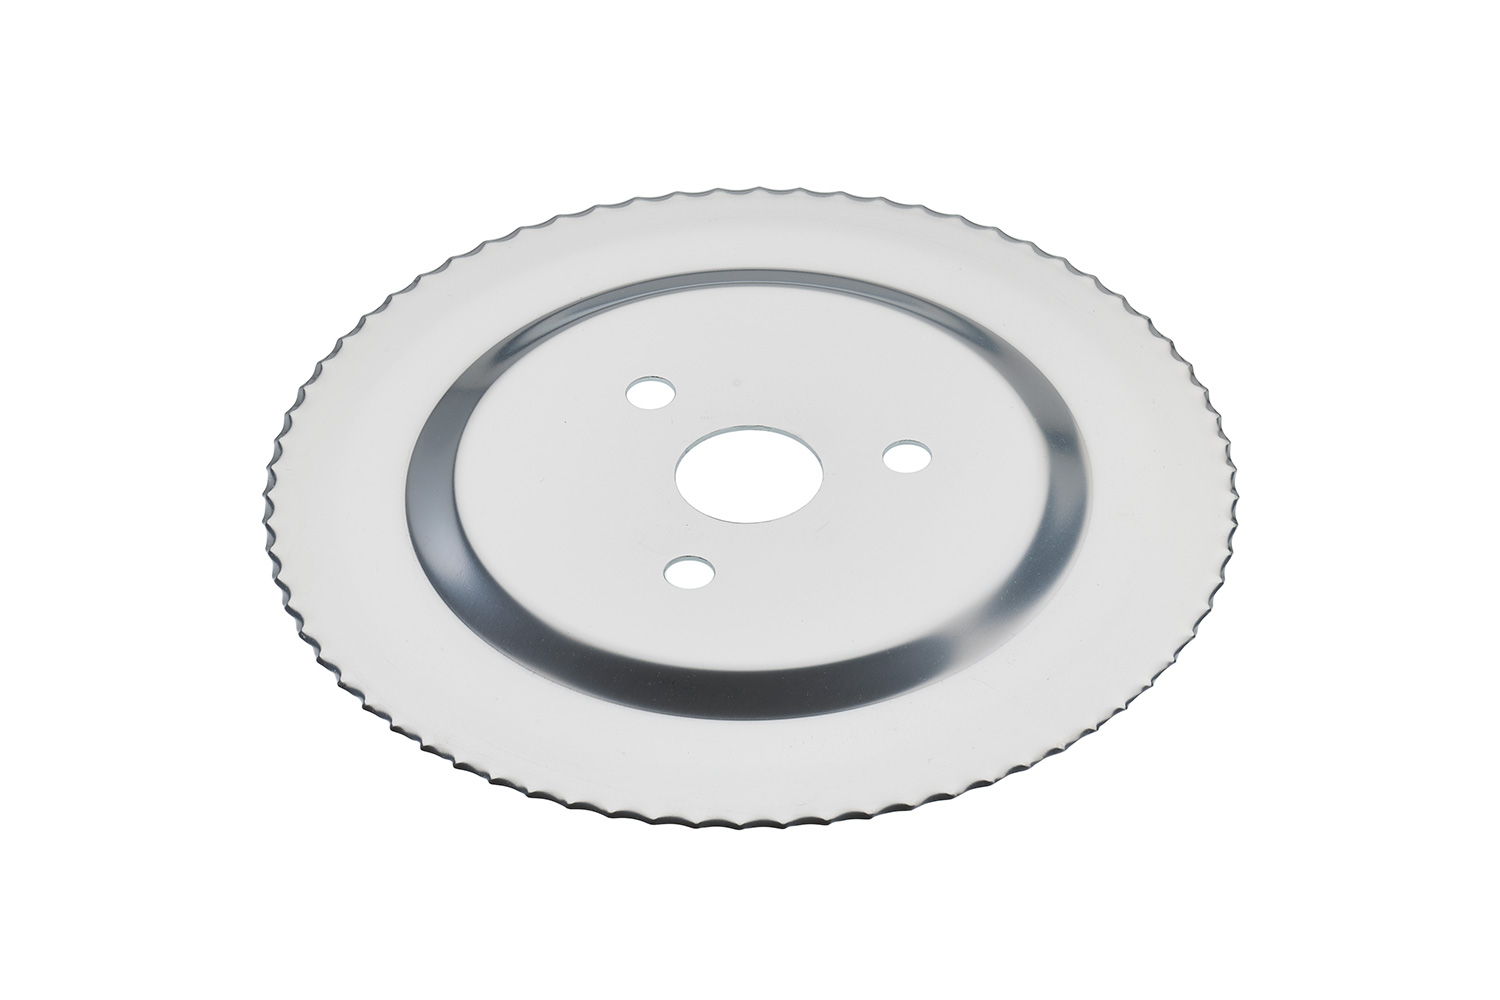 Serrated circular blade with electropolished surface and without a gear